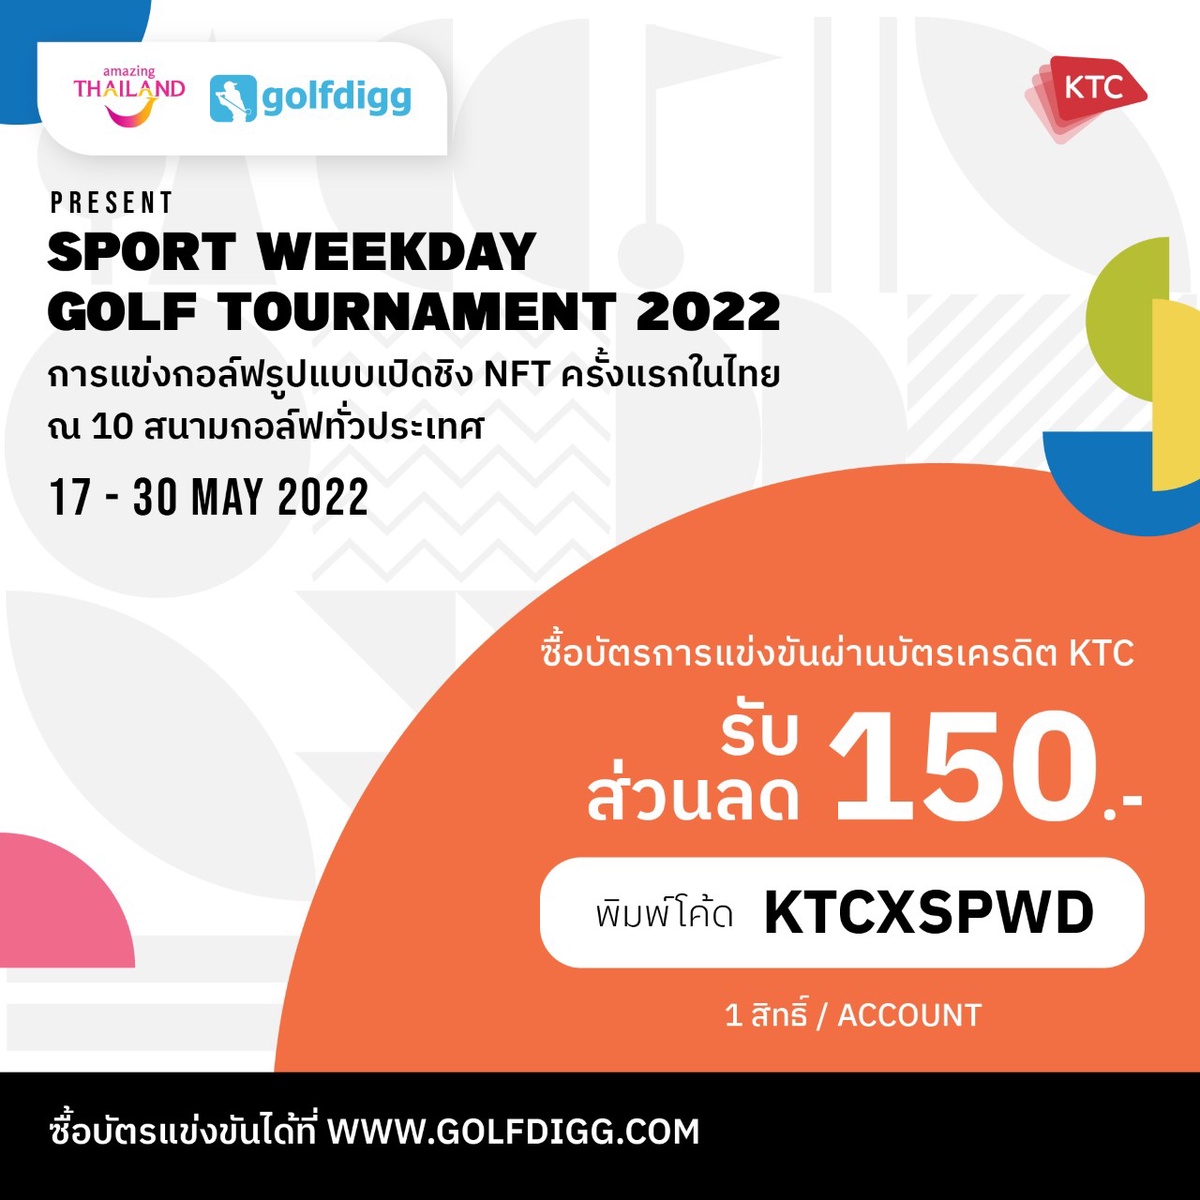 KTC partners with golfdigg in offering special discounts for an open golf tournament with NFT Trophy championship prizes for the first time in Thailand